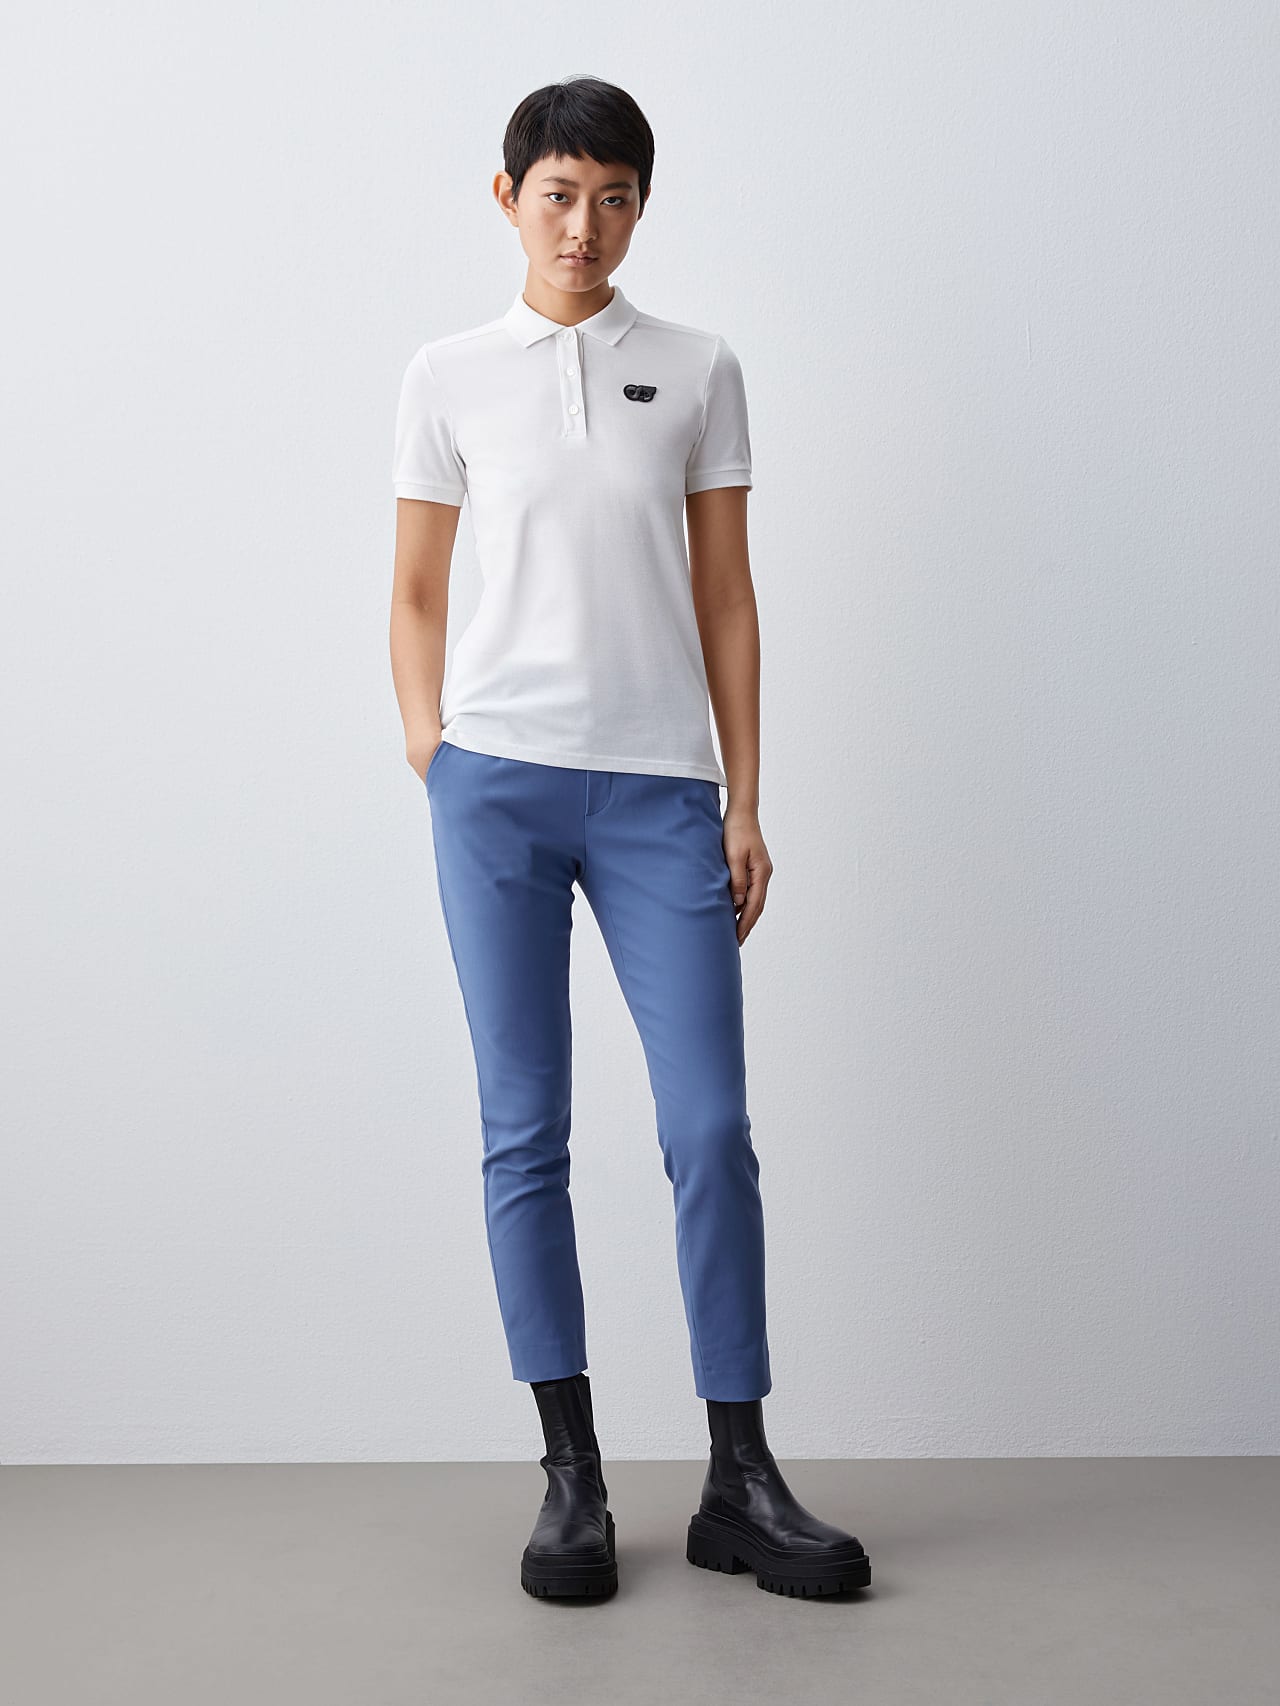 AlphaTauri | JANEY V1.Y5.02 | Pique Polo Shirt in offwhite for Women